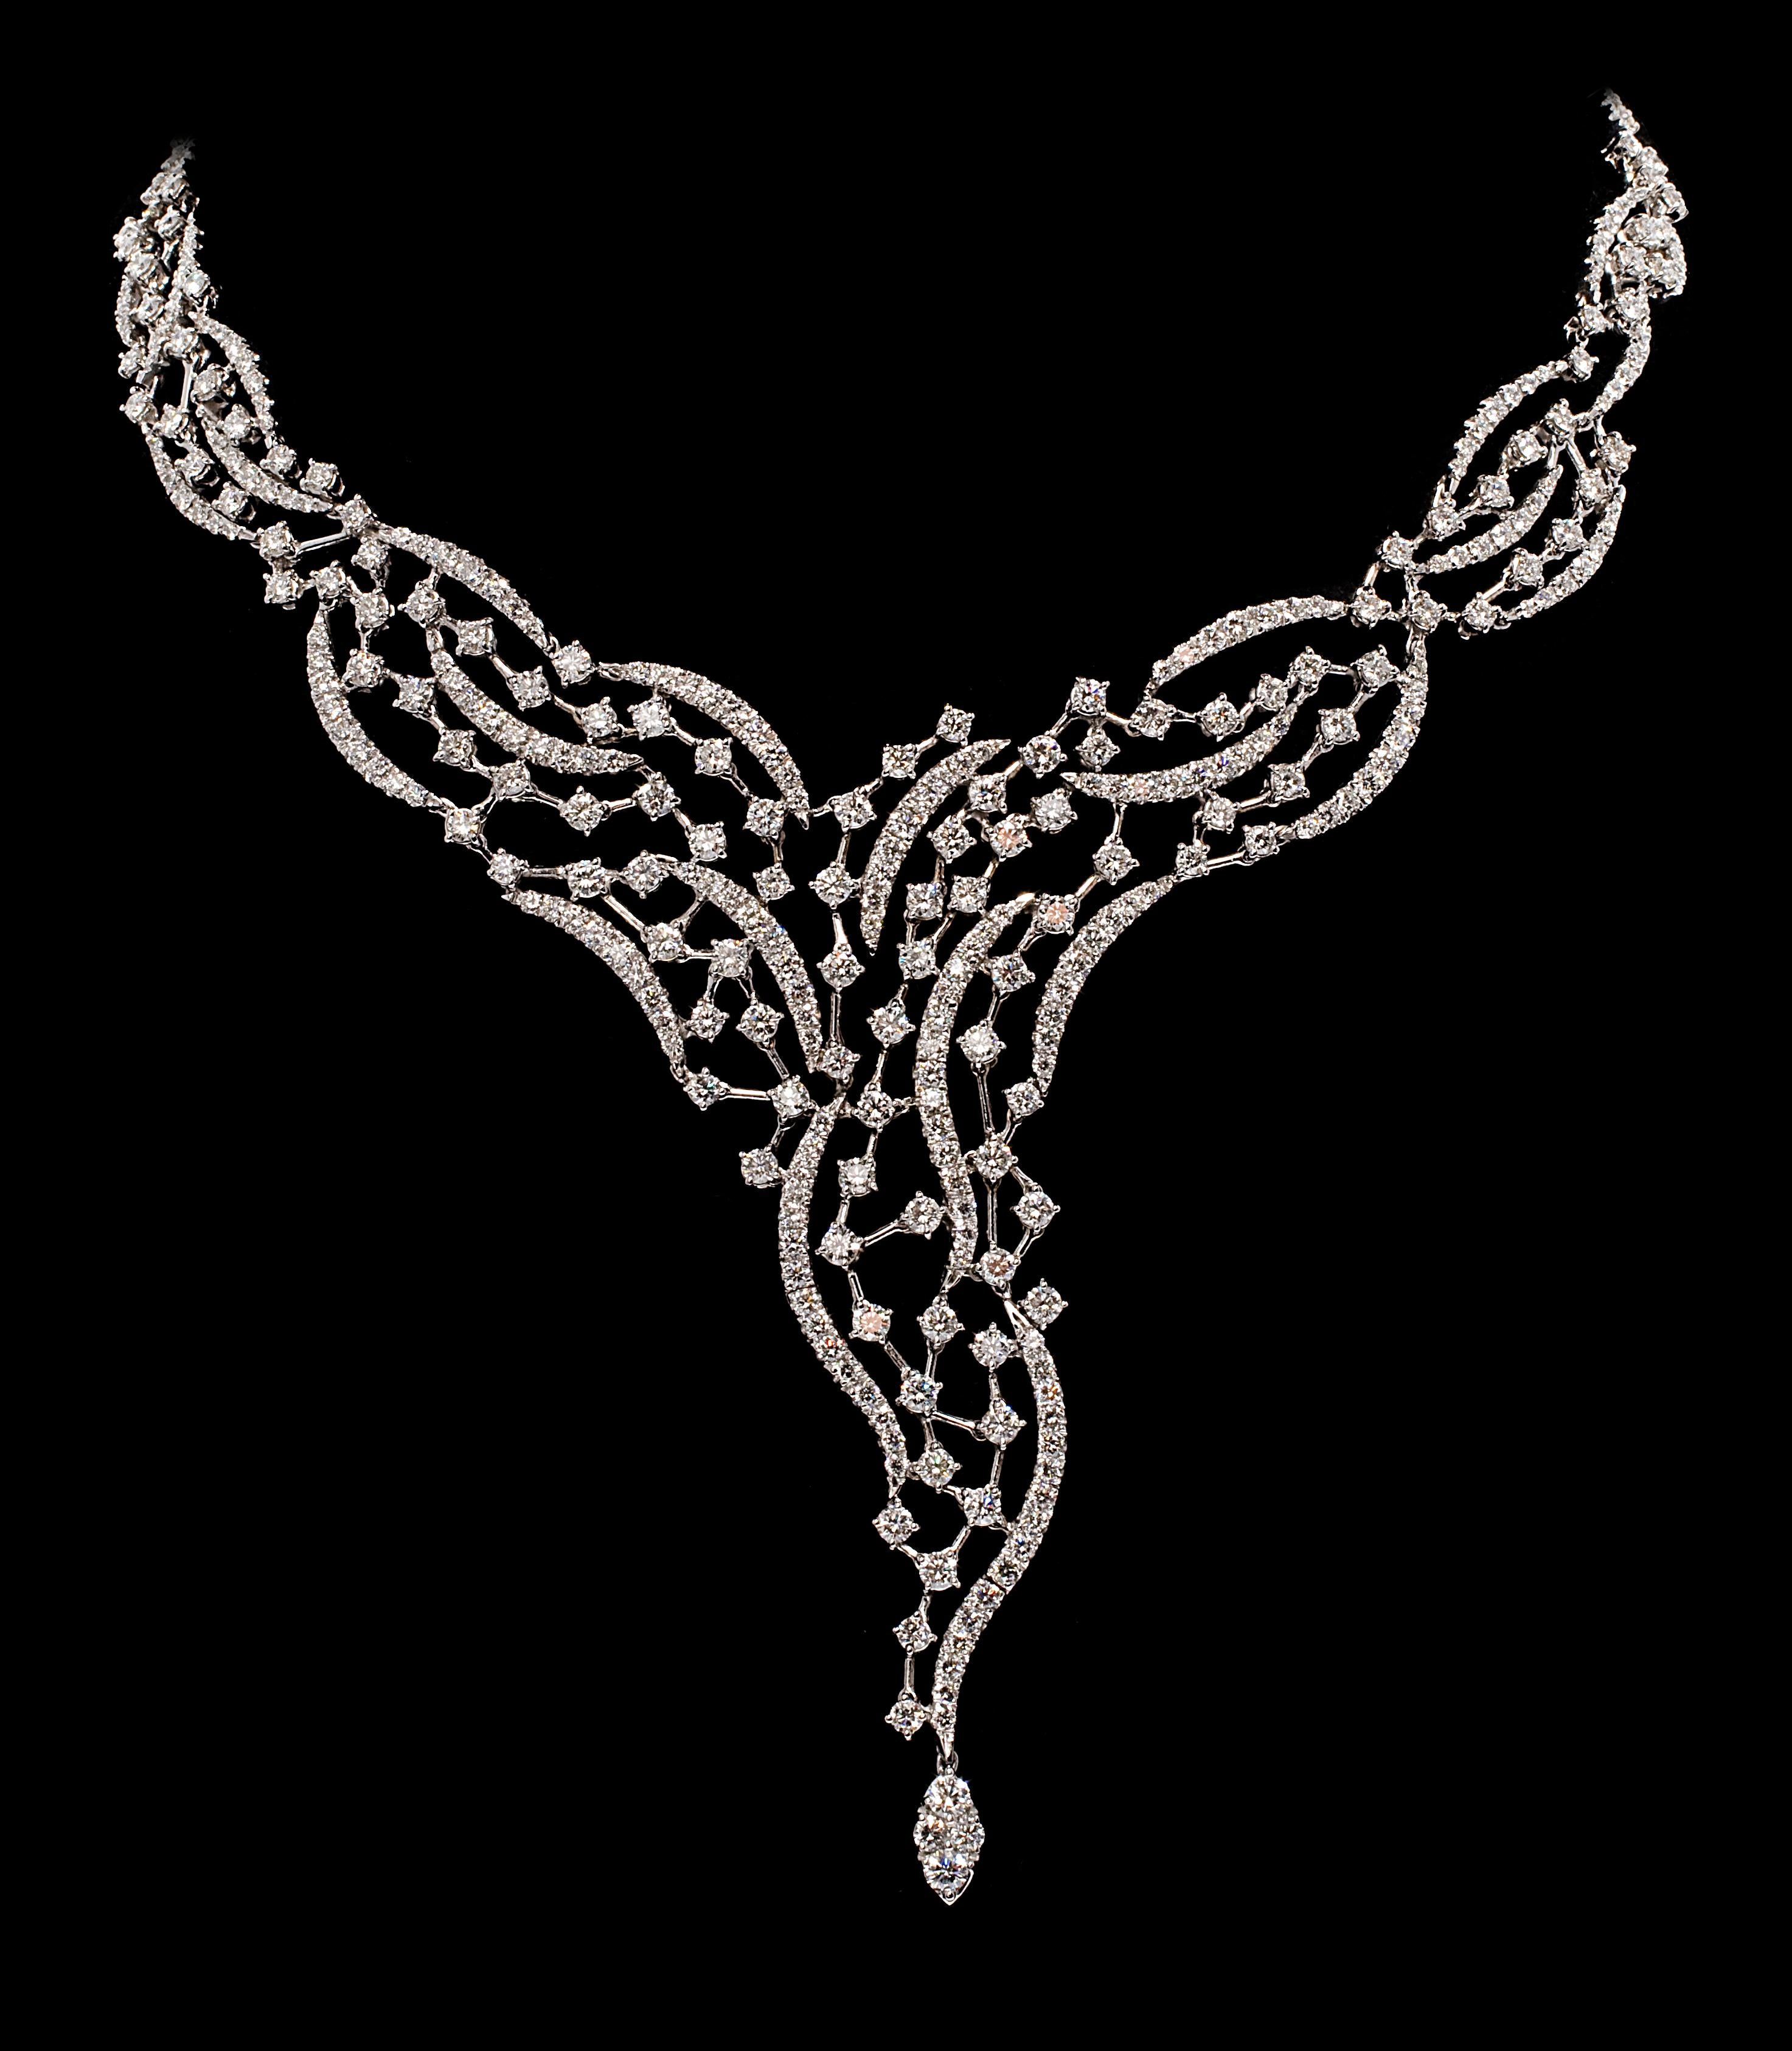 Andreoli 20.31 Carat Diamond 18 Karat Gold Necklace

This necklace features:
- 20.31 Carat Diamond
- 71.30 gram 18k White Gold
- Made In Italy